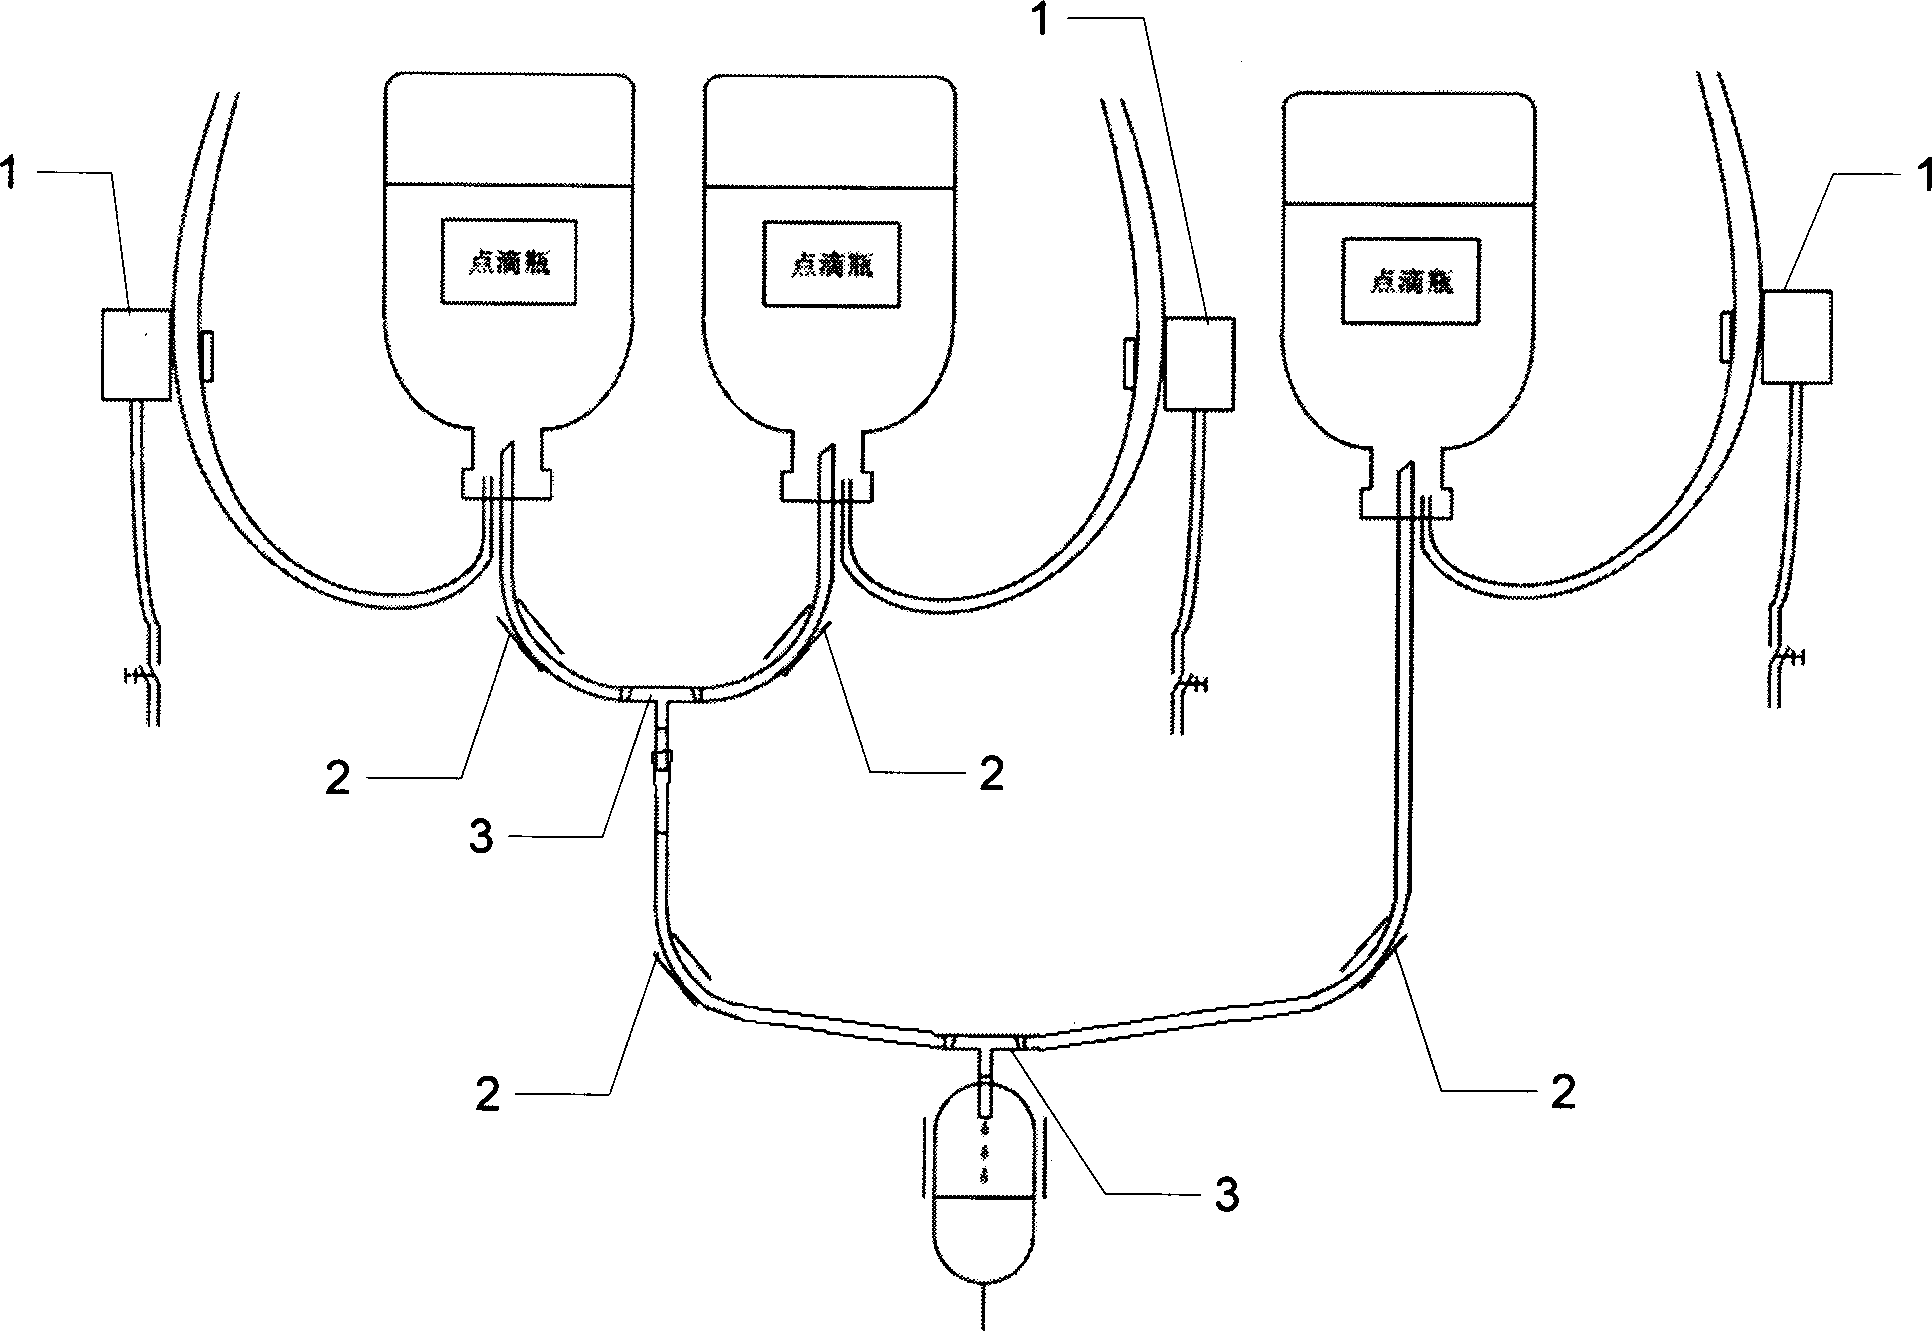 Intravenous drip automatic monitoring system